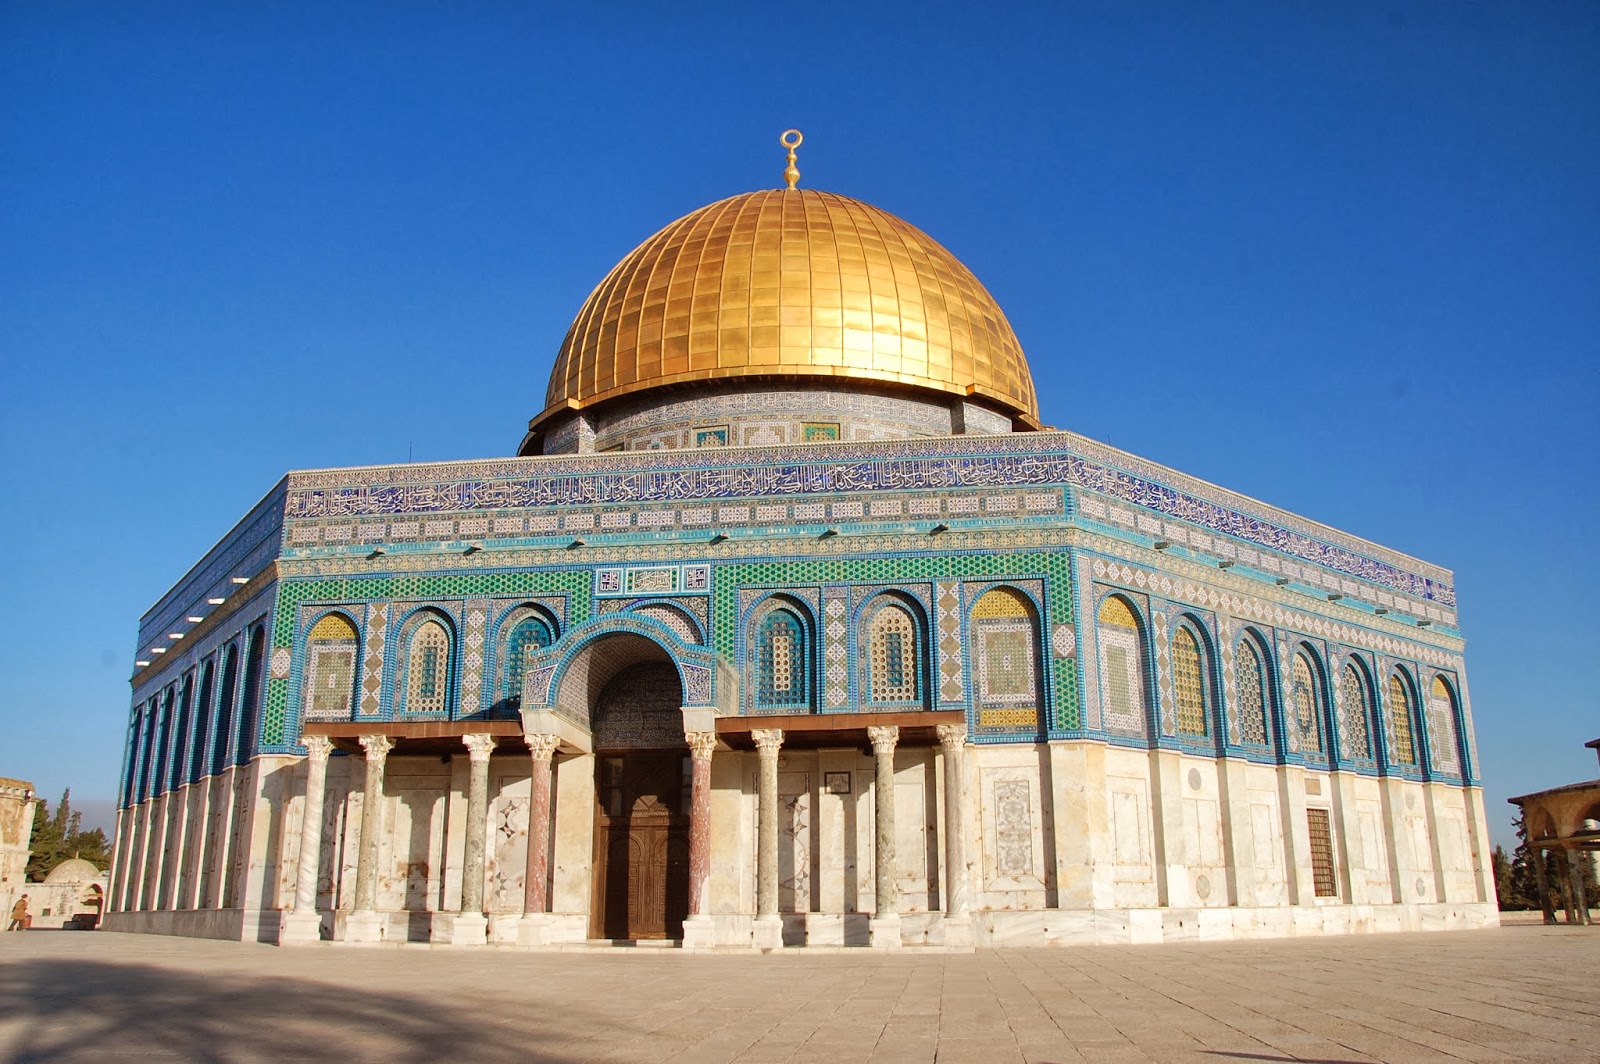 Palestinian territories & Dome of the Rock @Al-Aqsa Mosque and Bayt al-Muqaddas, in the Old City of Jerusalem